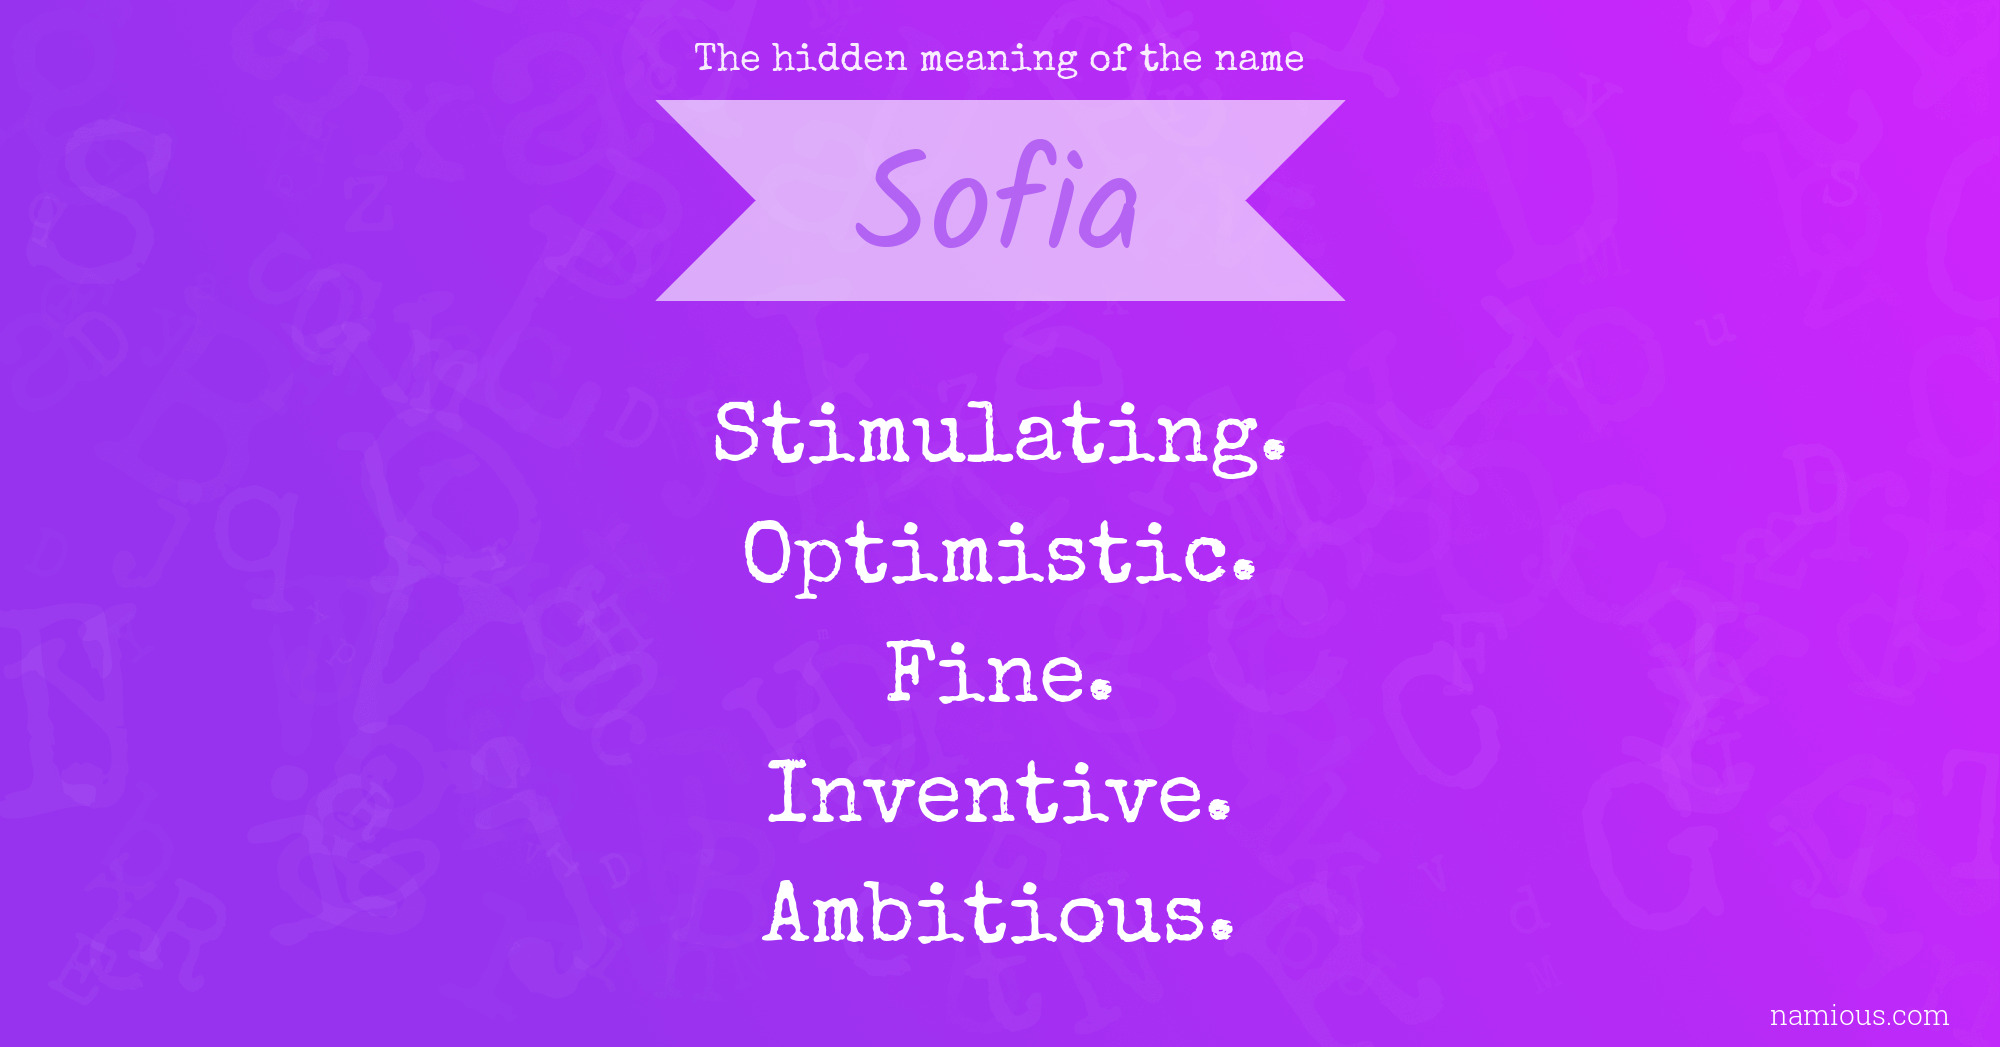 The hidden meaning of the name Sofia